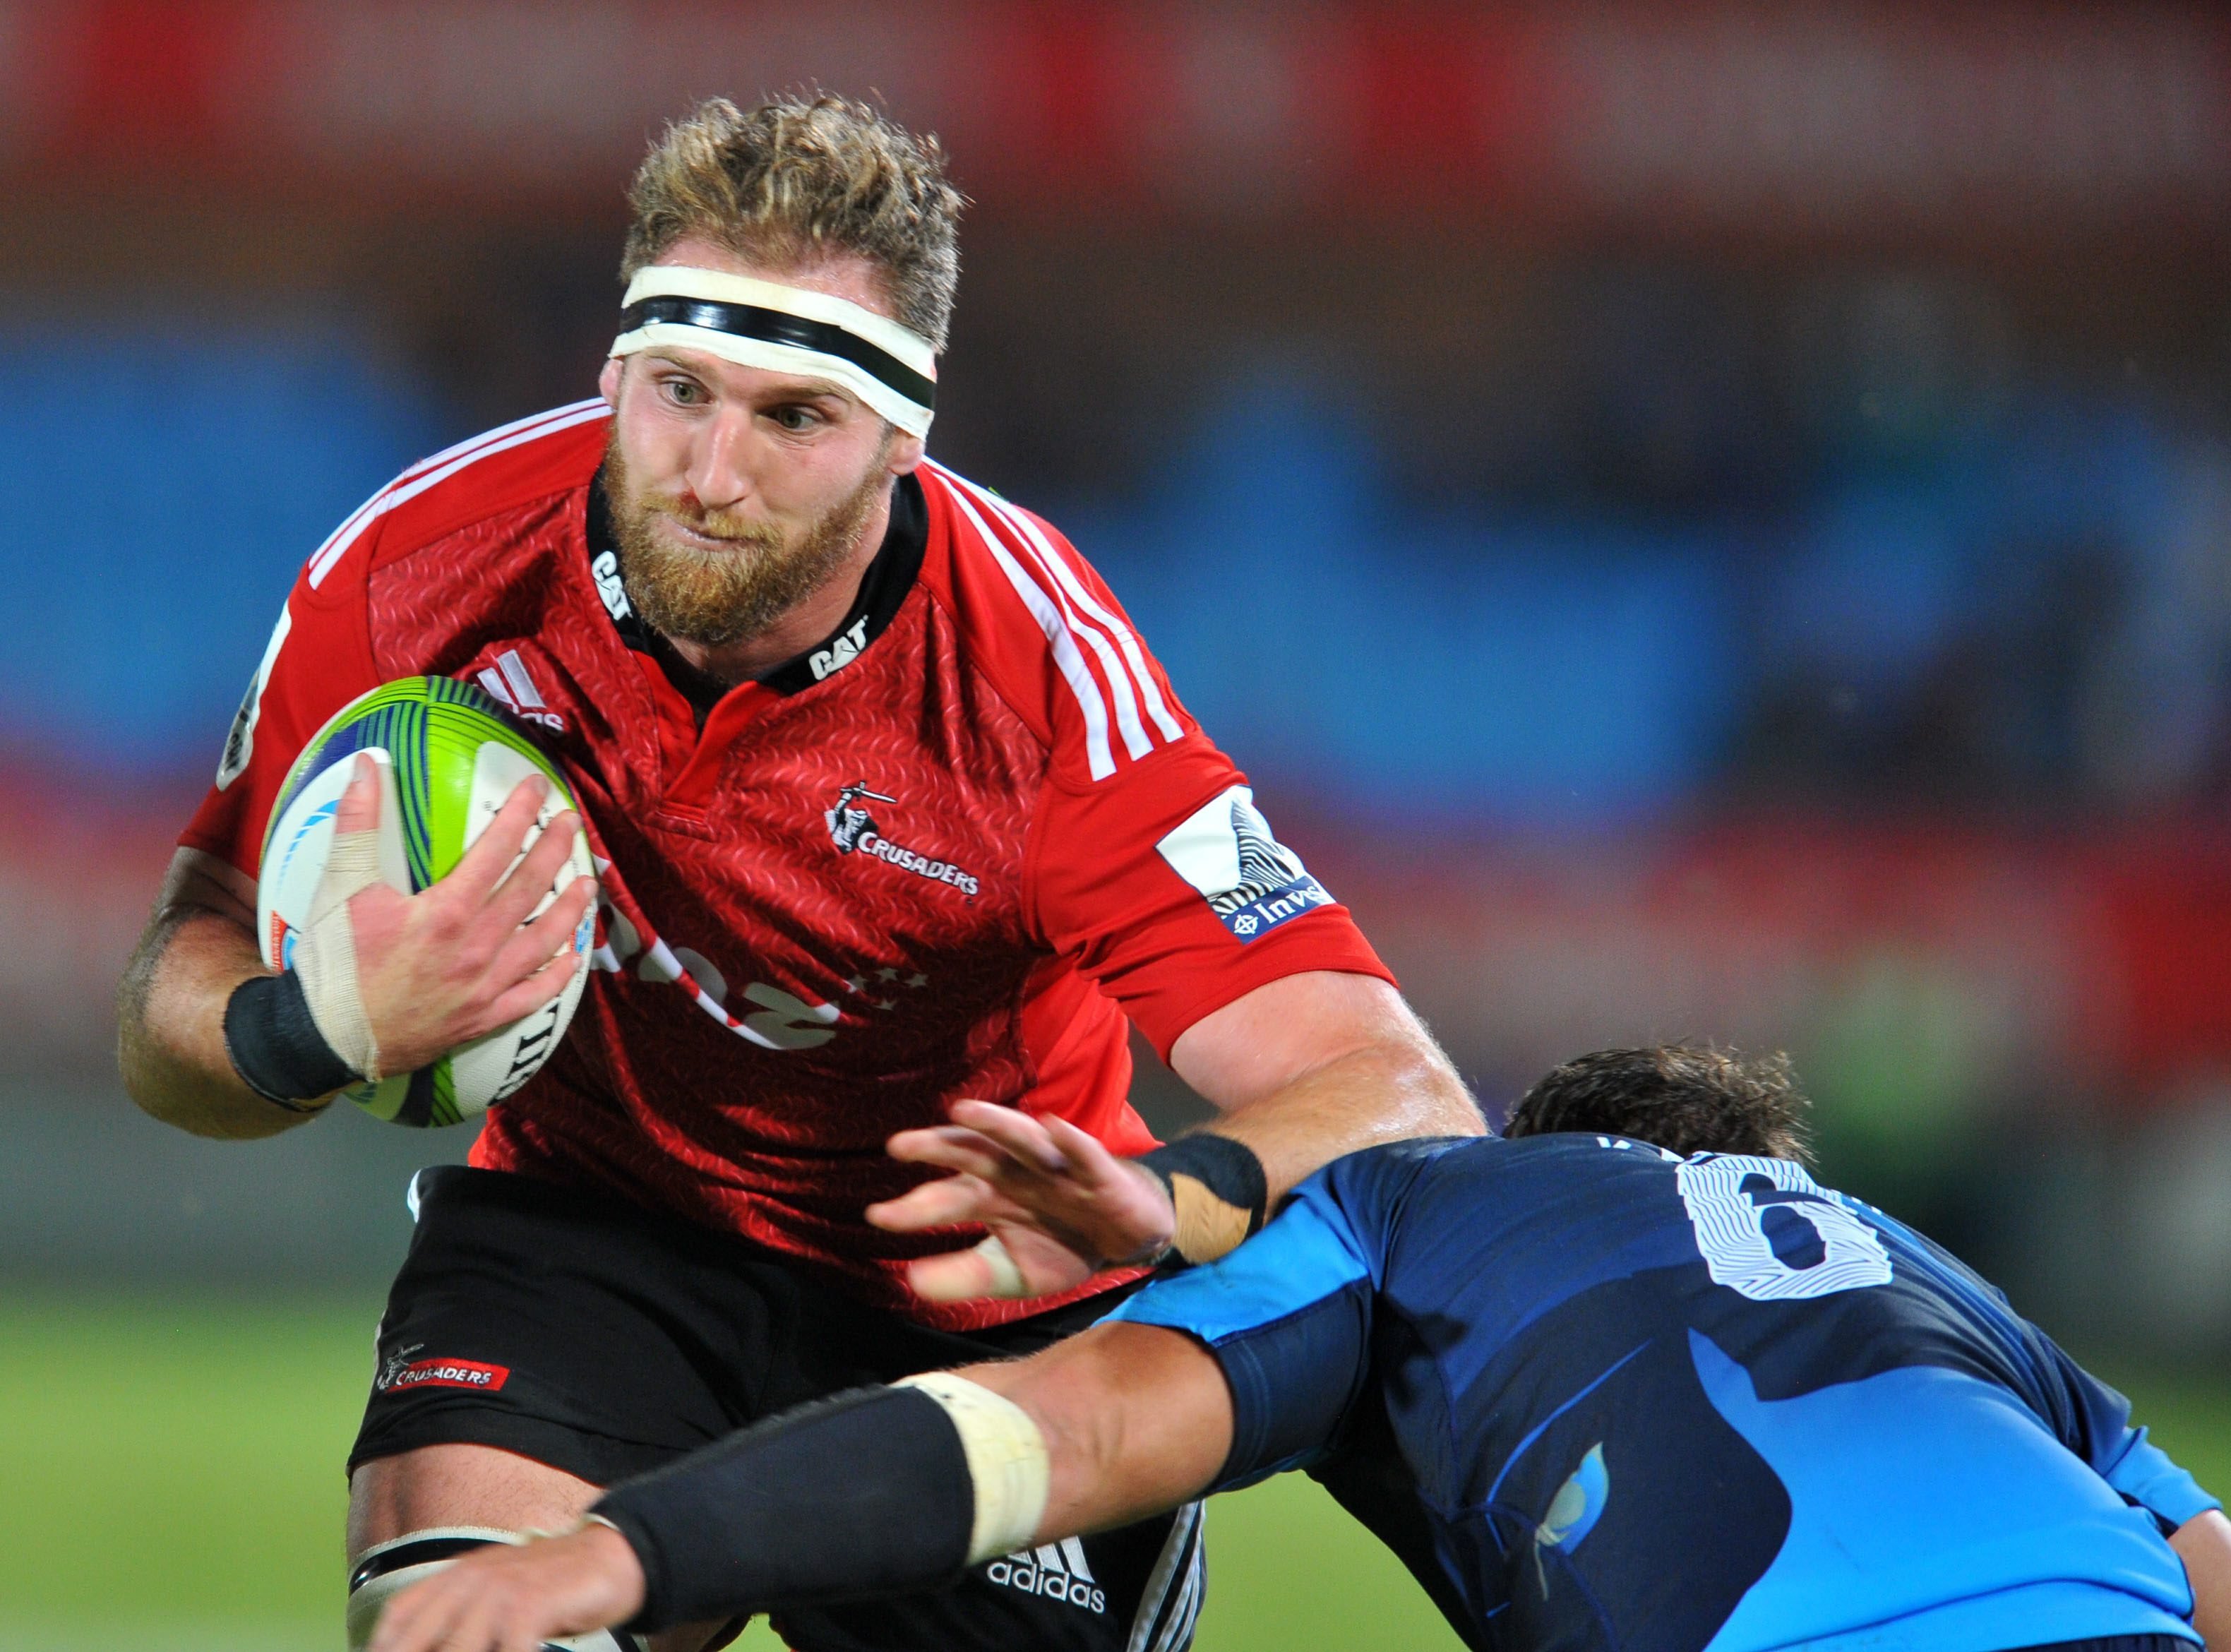 New Zealand and Crusaders number eight Kieran Read, in action against the Bulls in a Super 15 clash, is set on a leadership role with the All Blacks. Photo: AFP